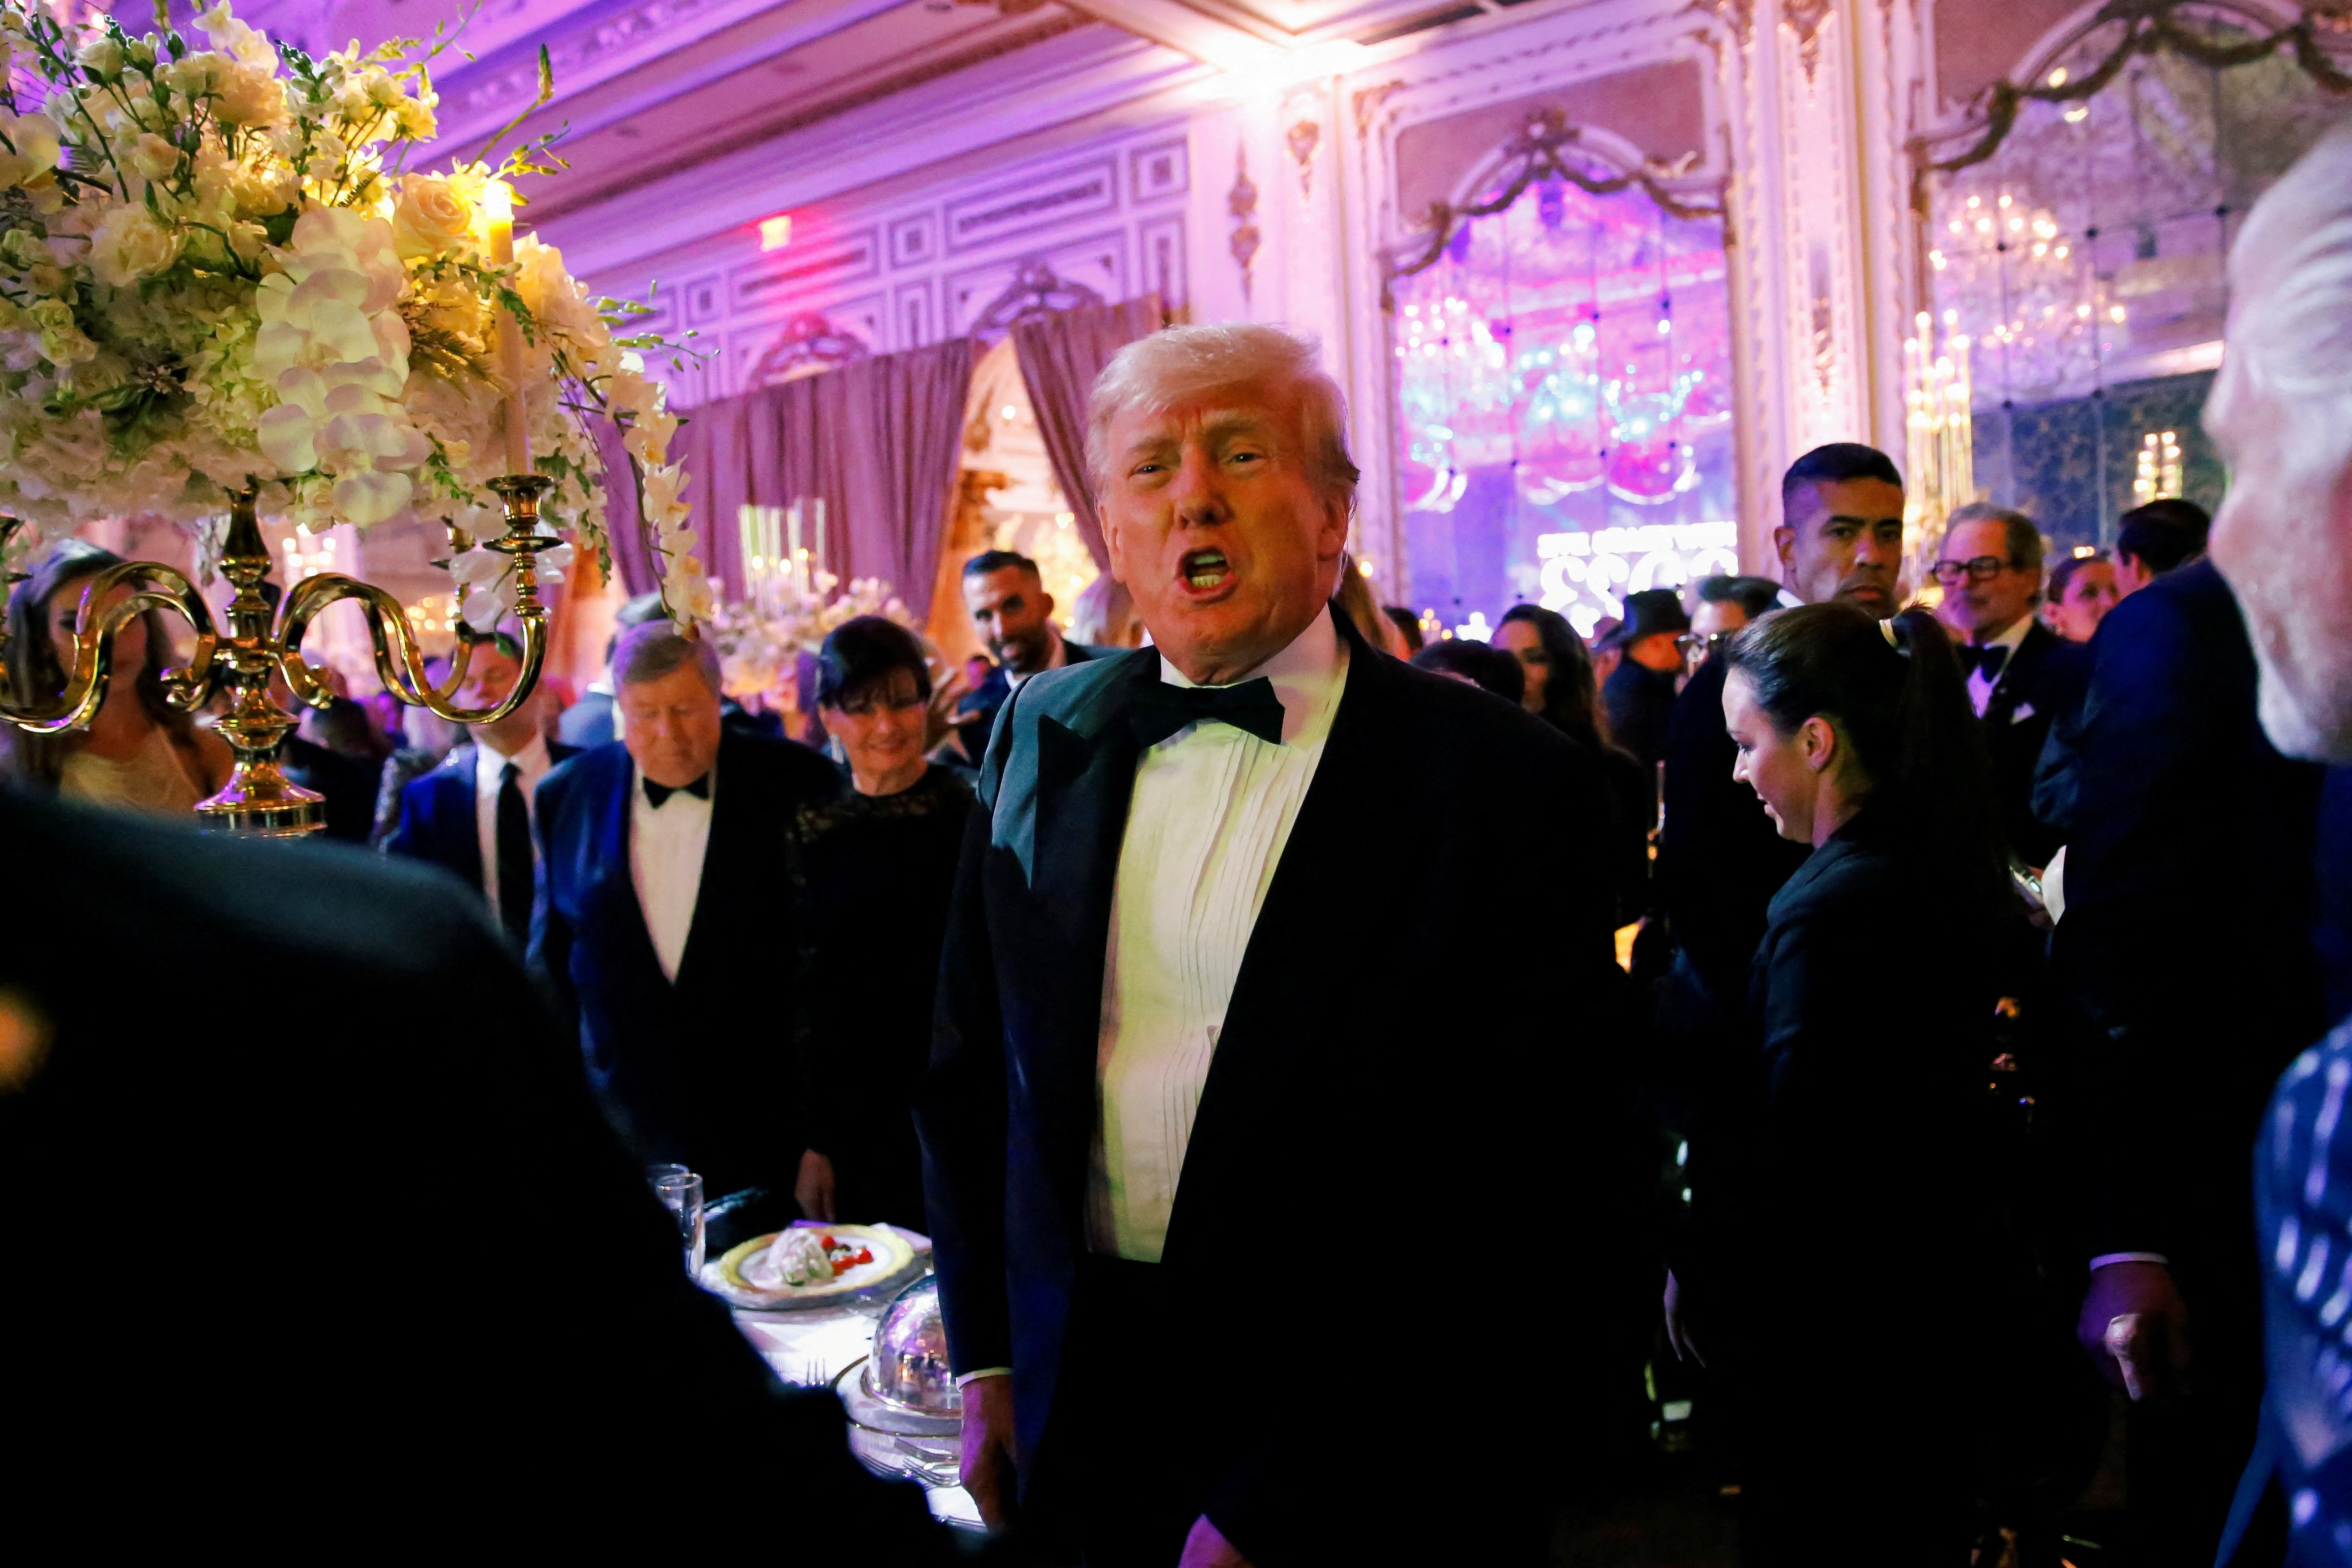 Former U.S. President Donald Trump, who announced a third run for the presidency in 2024, hosts a New Year's Eve party at his Mar-a-Lago resort in Palm Beach, Florida, U.S. December 31, 2022. Photo: Reuters